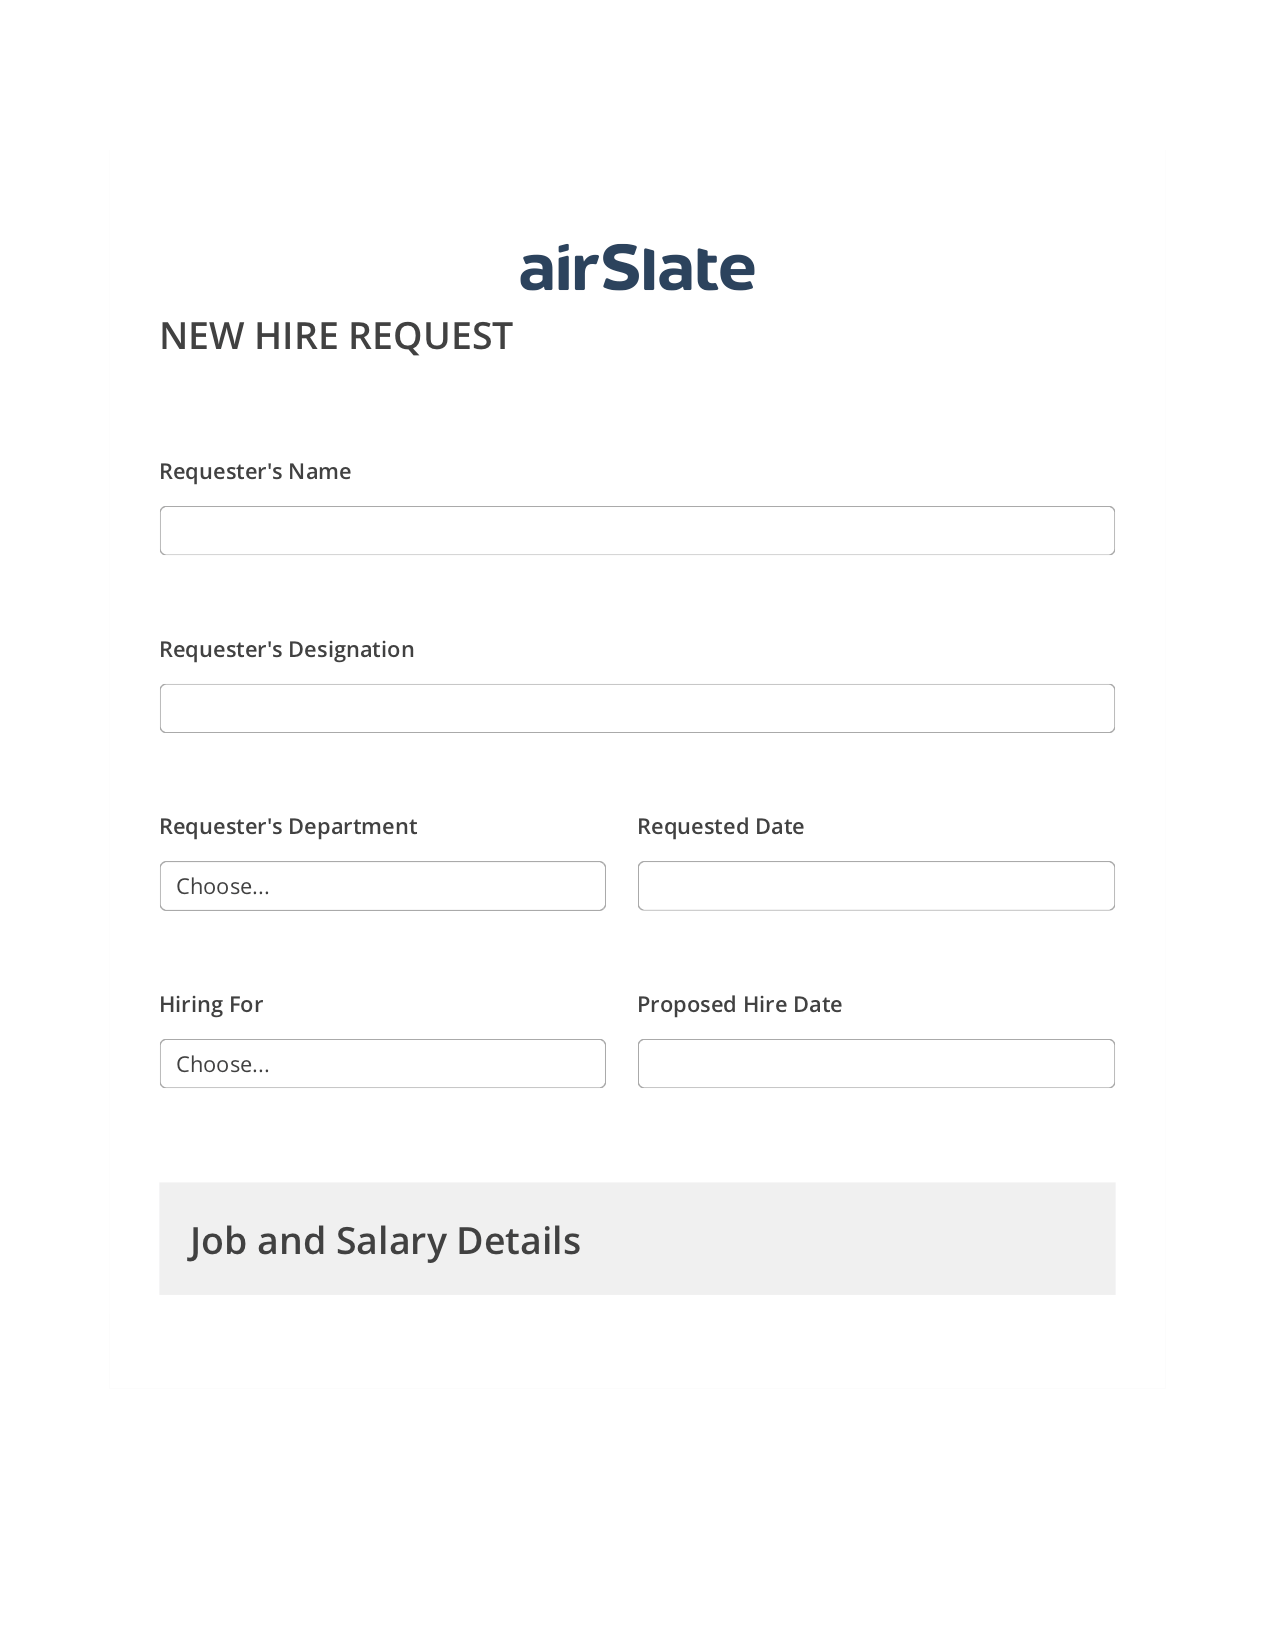 Hiring Request Workflow Pre-fill from Litmos bot, Remove Slate Bot, Export to Salesforce Record Bot